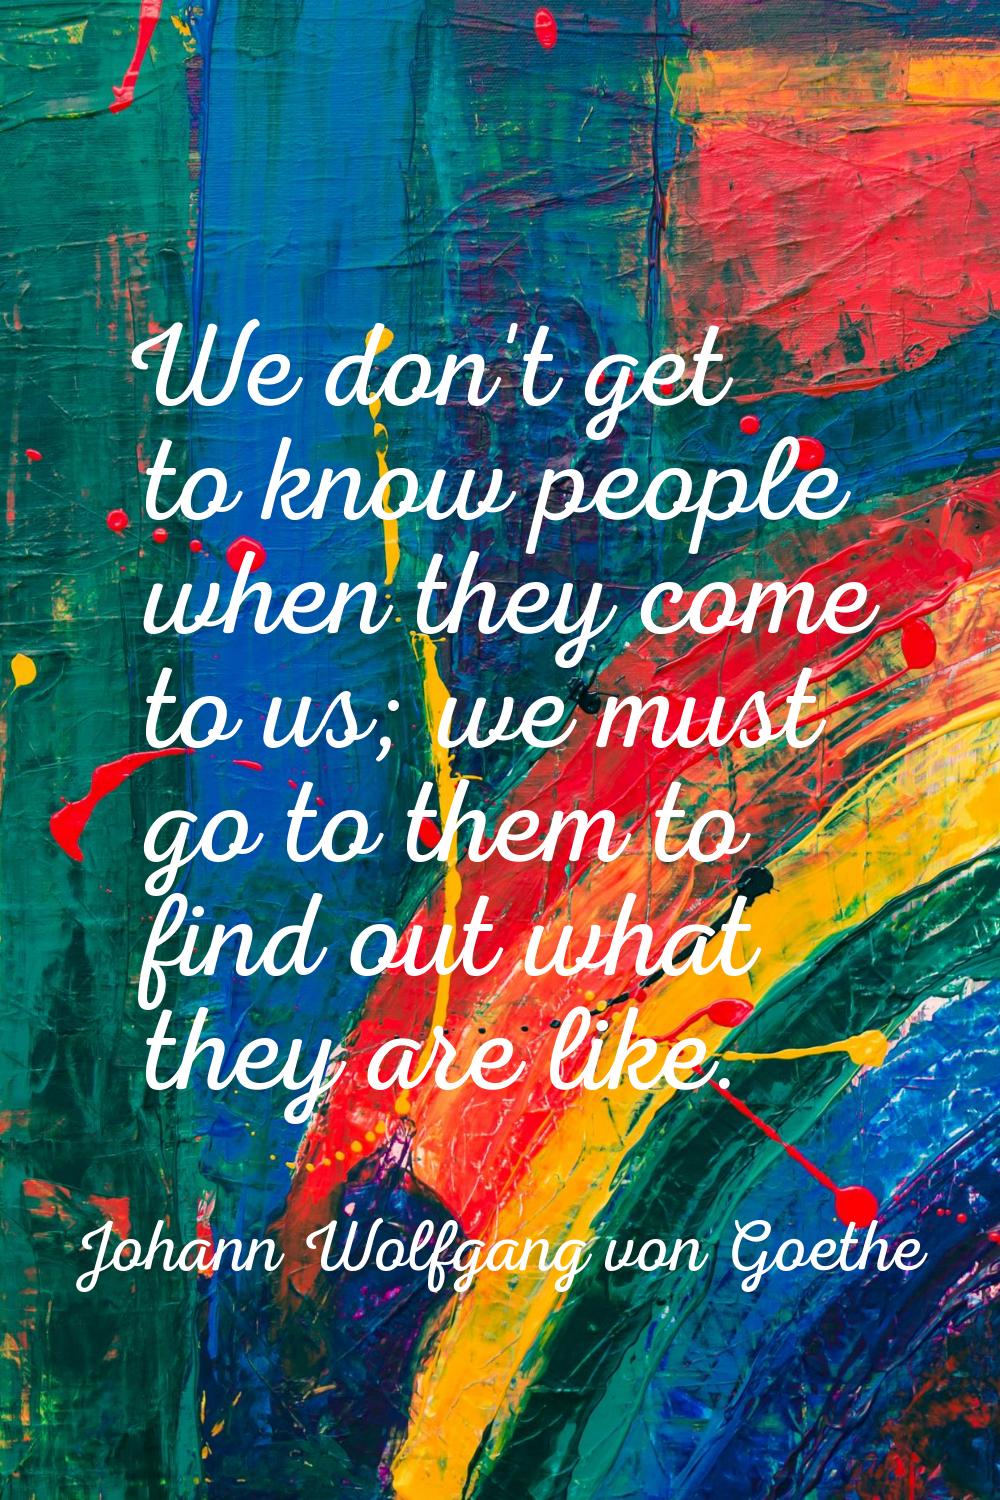 We don't get to know people when they come to us; we must go to them to find out what they are like